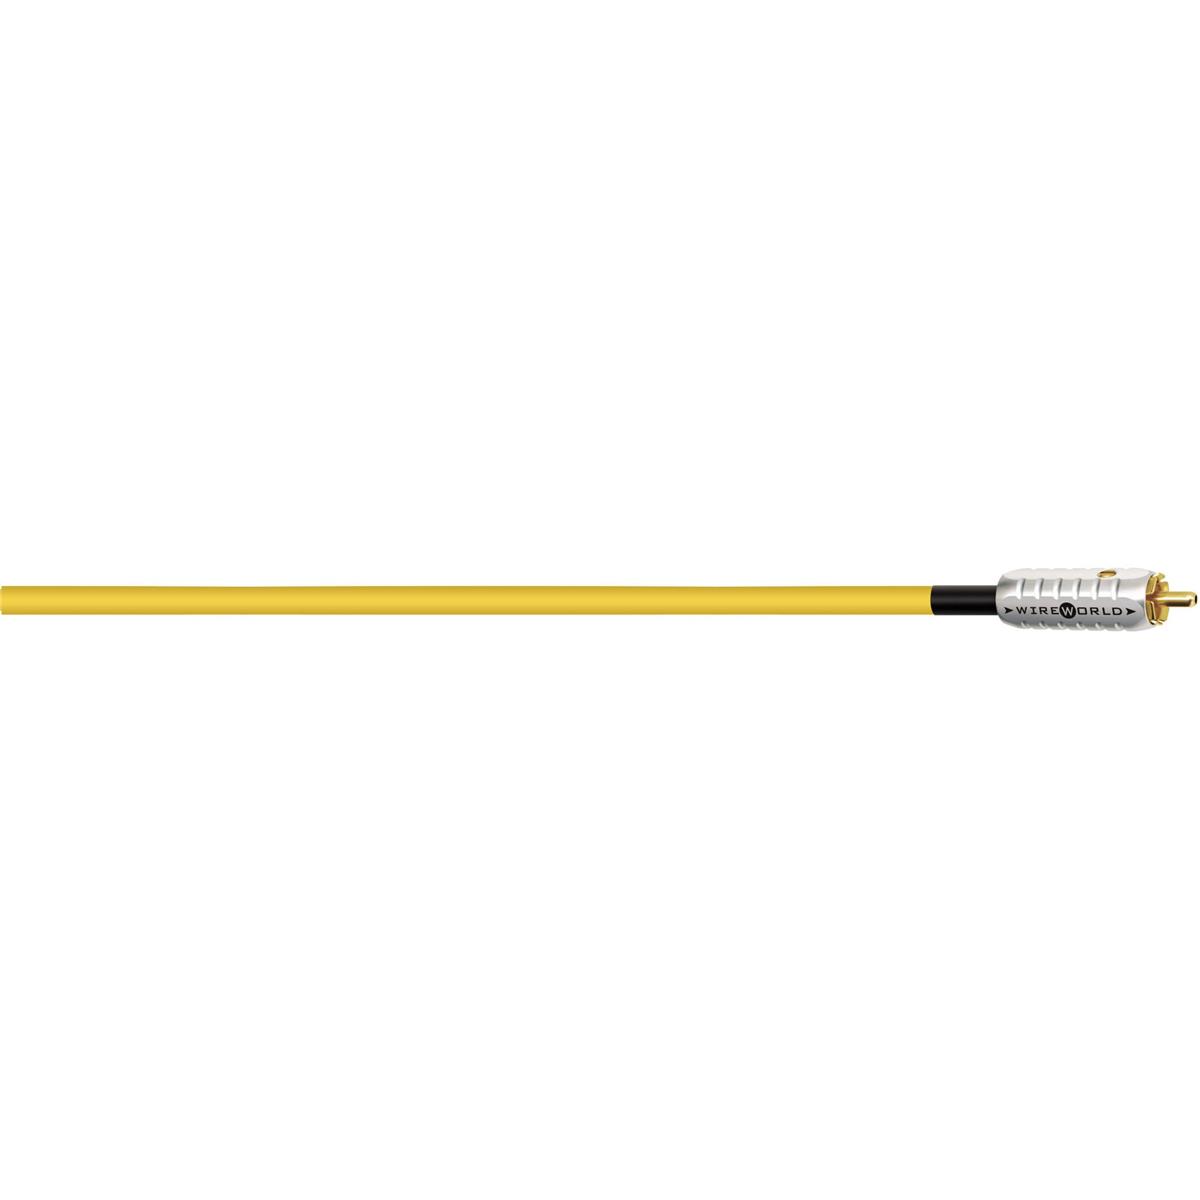 Image of WireWorld Chroma (CRV) Coaxial Digital Audio Cable